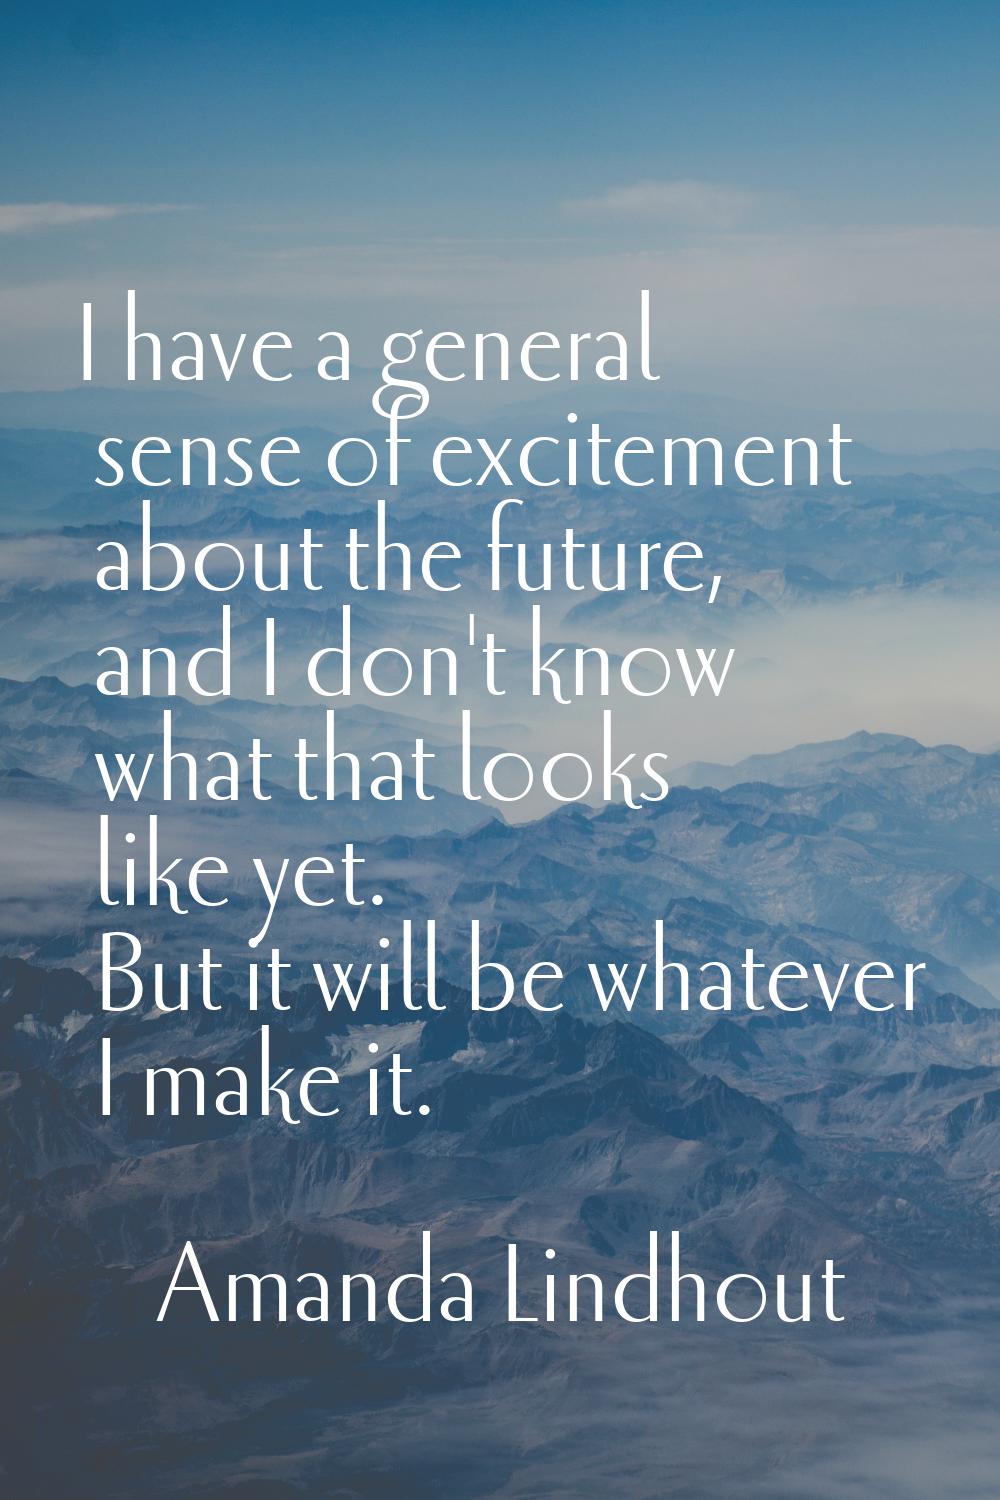 I have a general sense of excitement about the future, and I don't know what that looks like yet. B